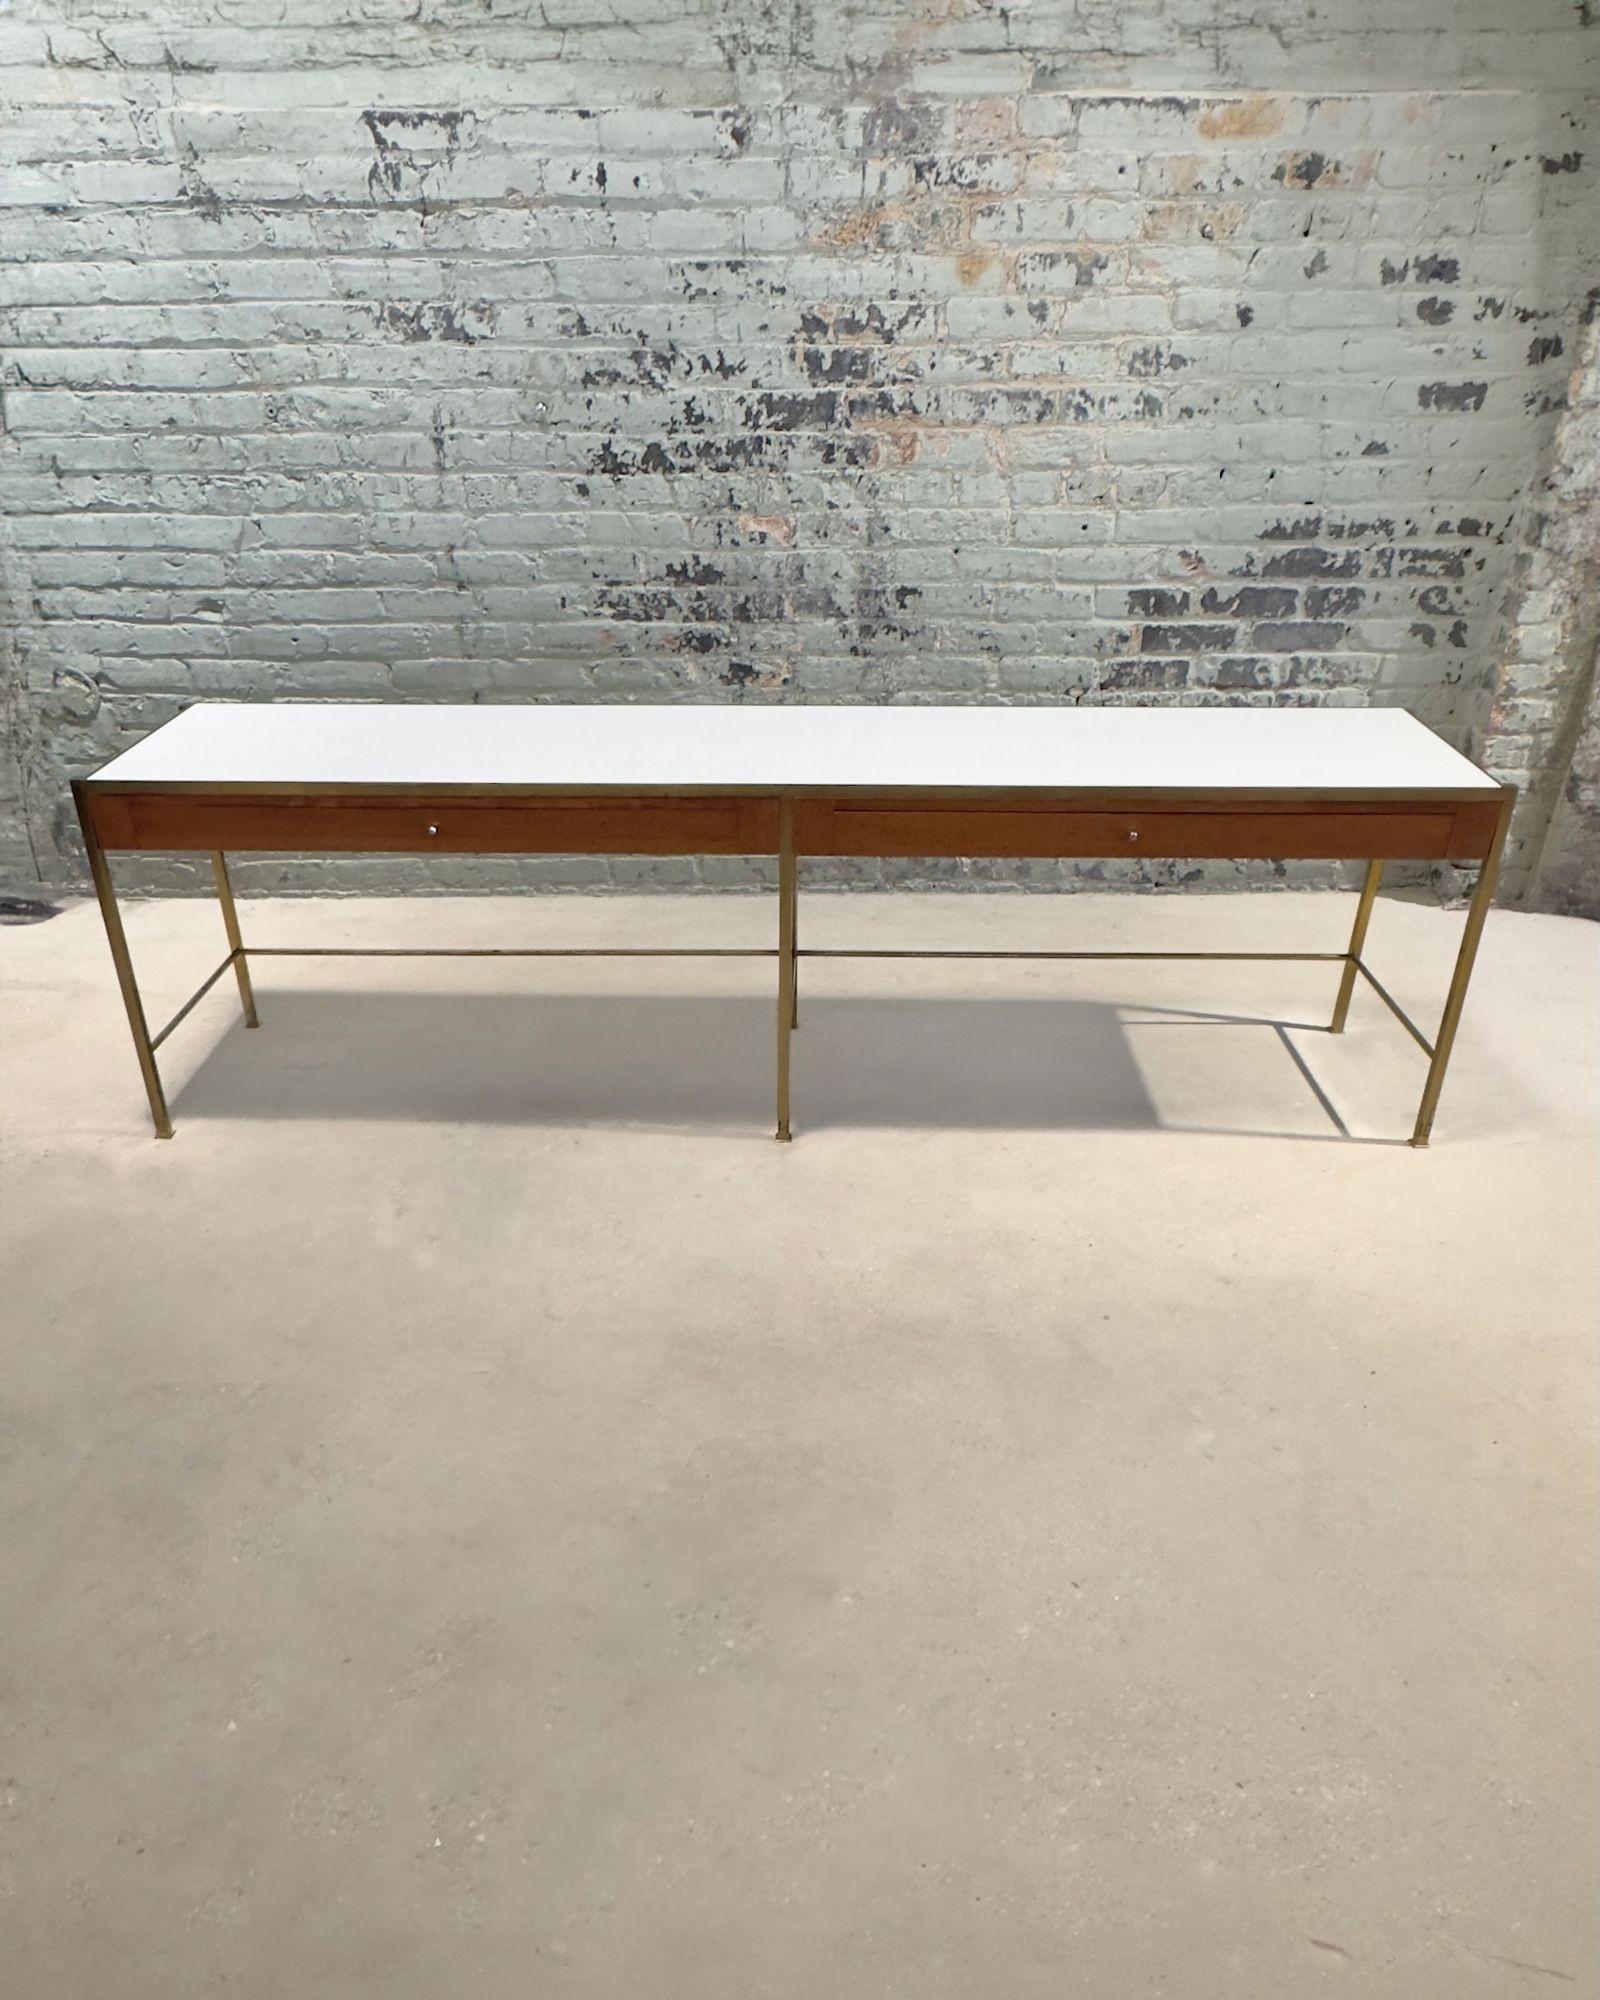 Mid Century Modern Console w/Vitrolite Glass and Brass Style of Paul McCobb, 1960. As shown in pics the Vitrolite glass had broken on the corner, but has been repaired. Does not take away from the beauty of this unusual piece. Brass has a beautiful